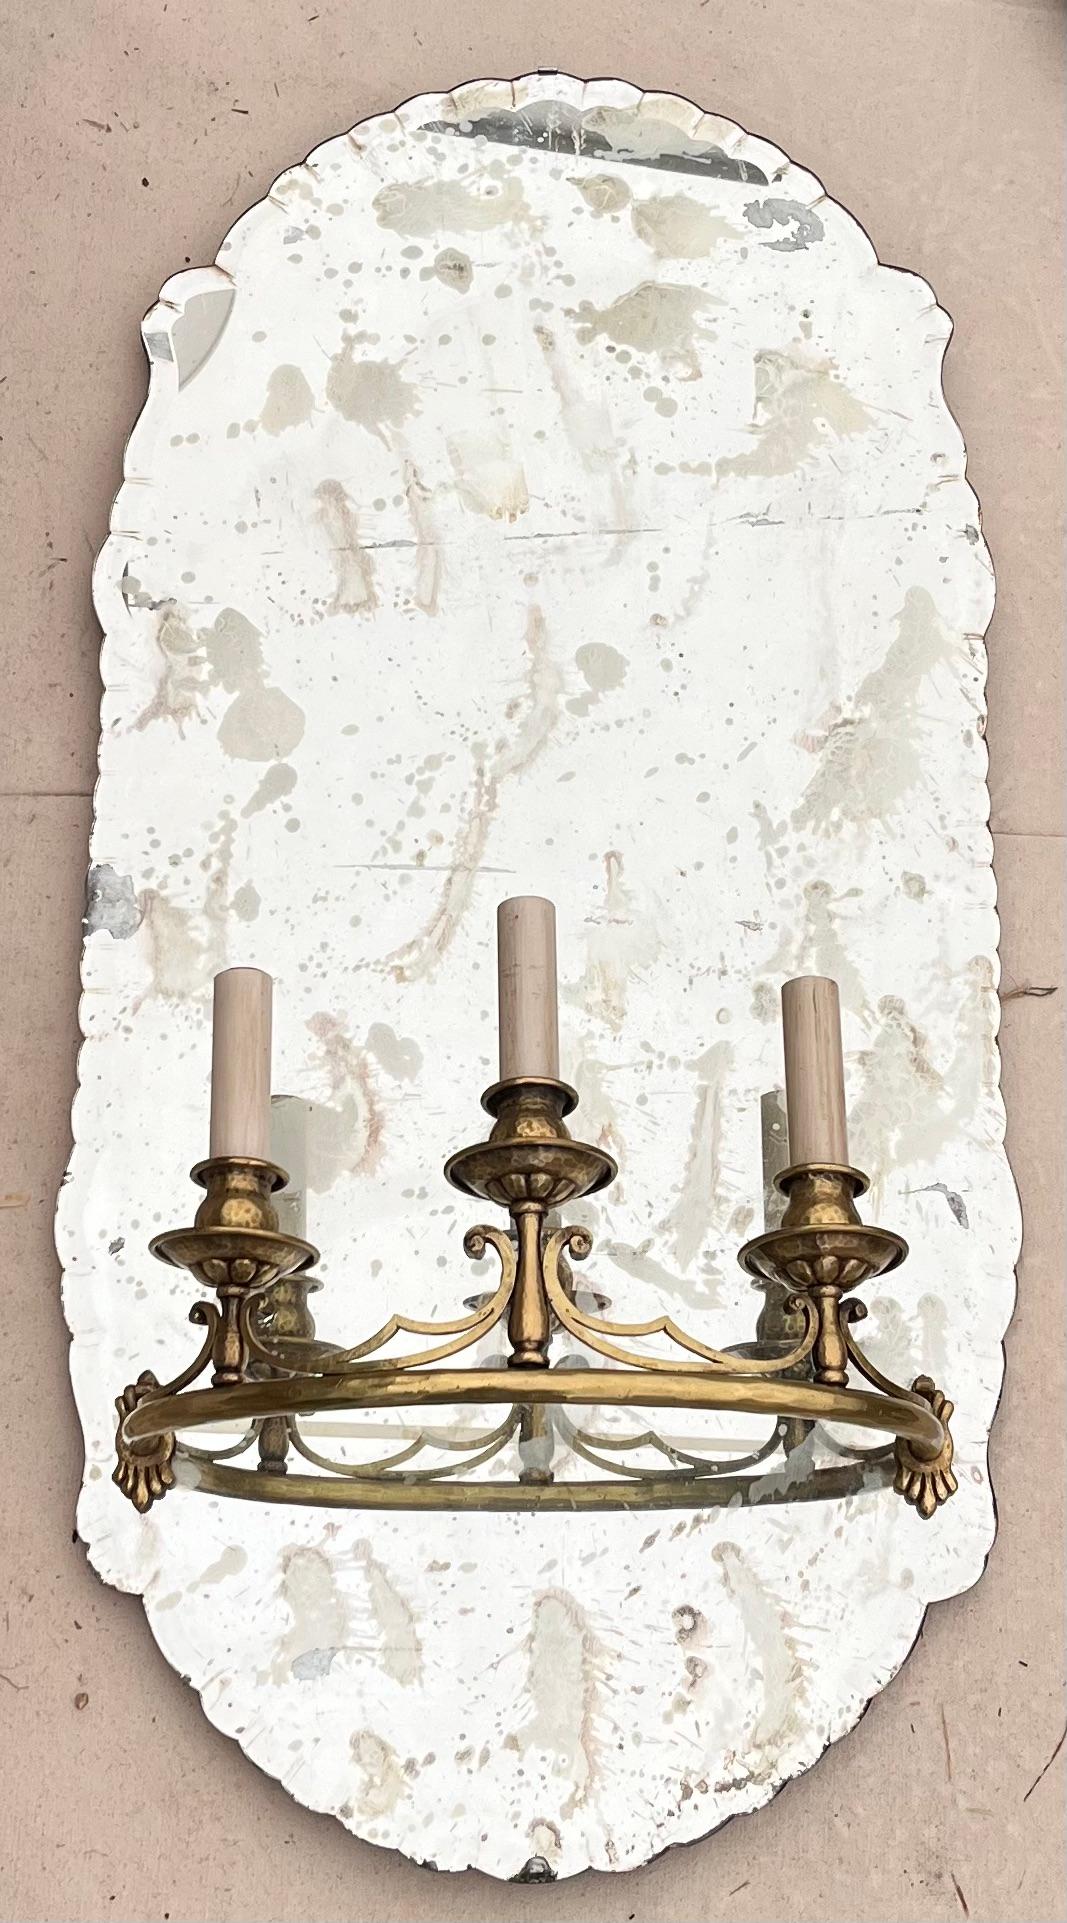 Pair of large scale antique mirror glass Italian sconces with three arms. They retain their original wood backs and are electrified. They make a fantastic presence in any installation.